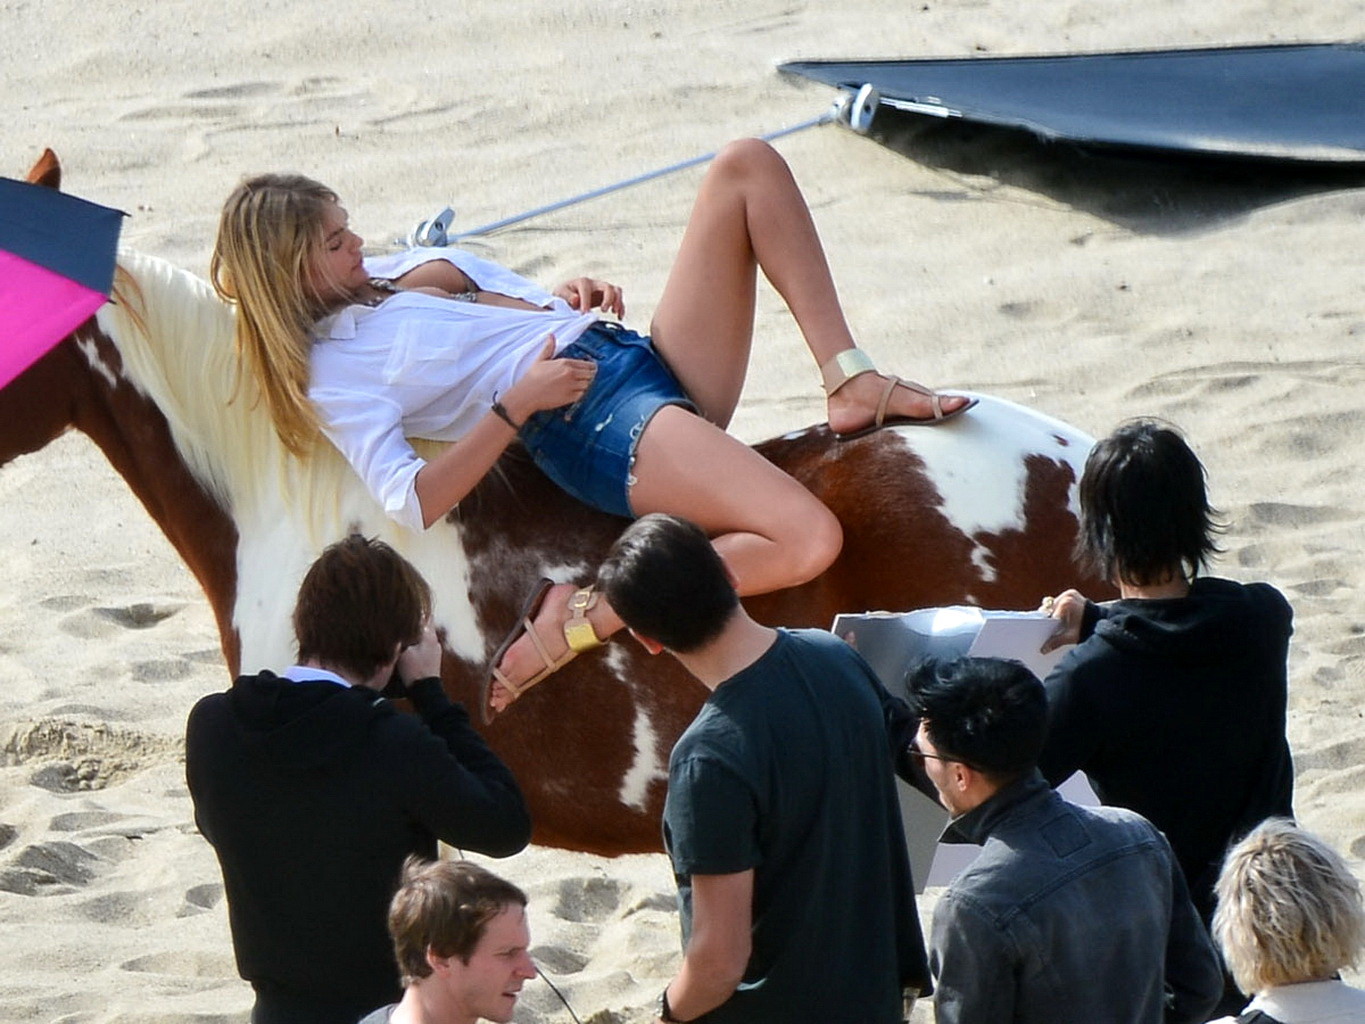 Kate Upton showing off her cleavage and ass on the set of a photoshoot in Malibu #75211916